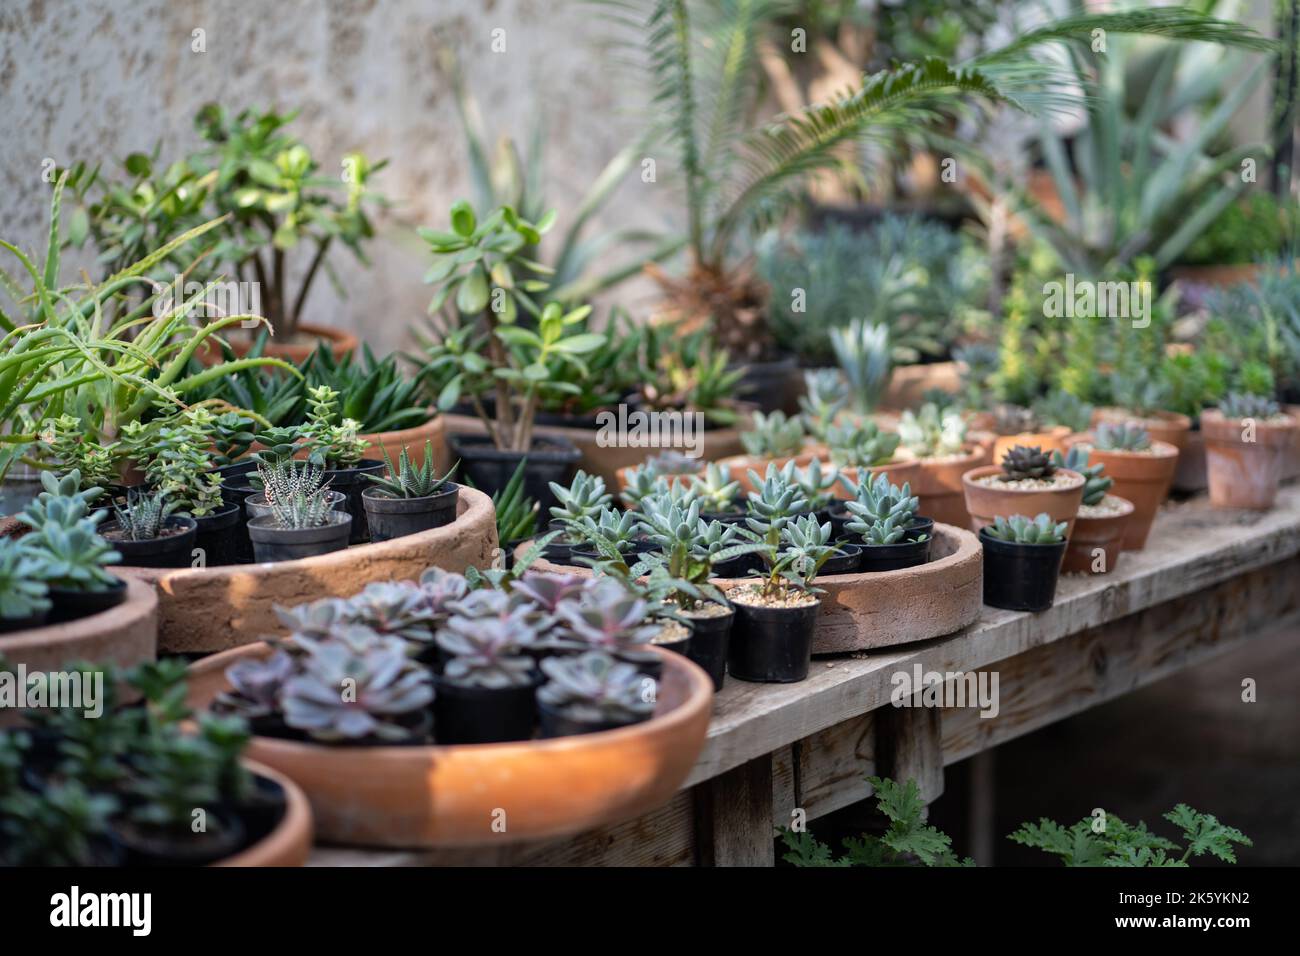 Cozy plant store with planter pots on wooden showcase. Home floral design studio. Small business. Stock Photo